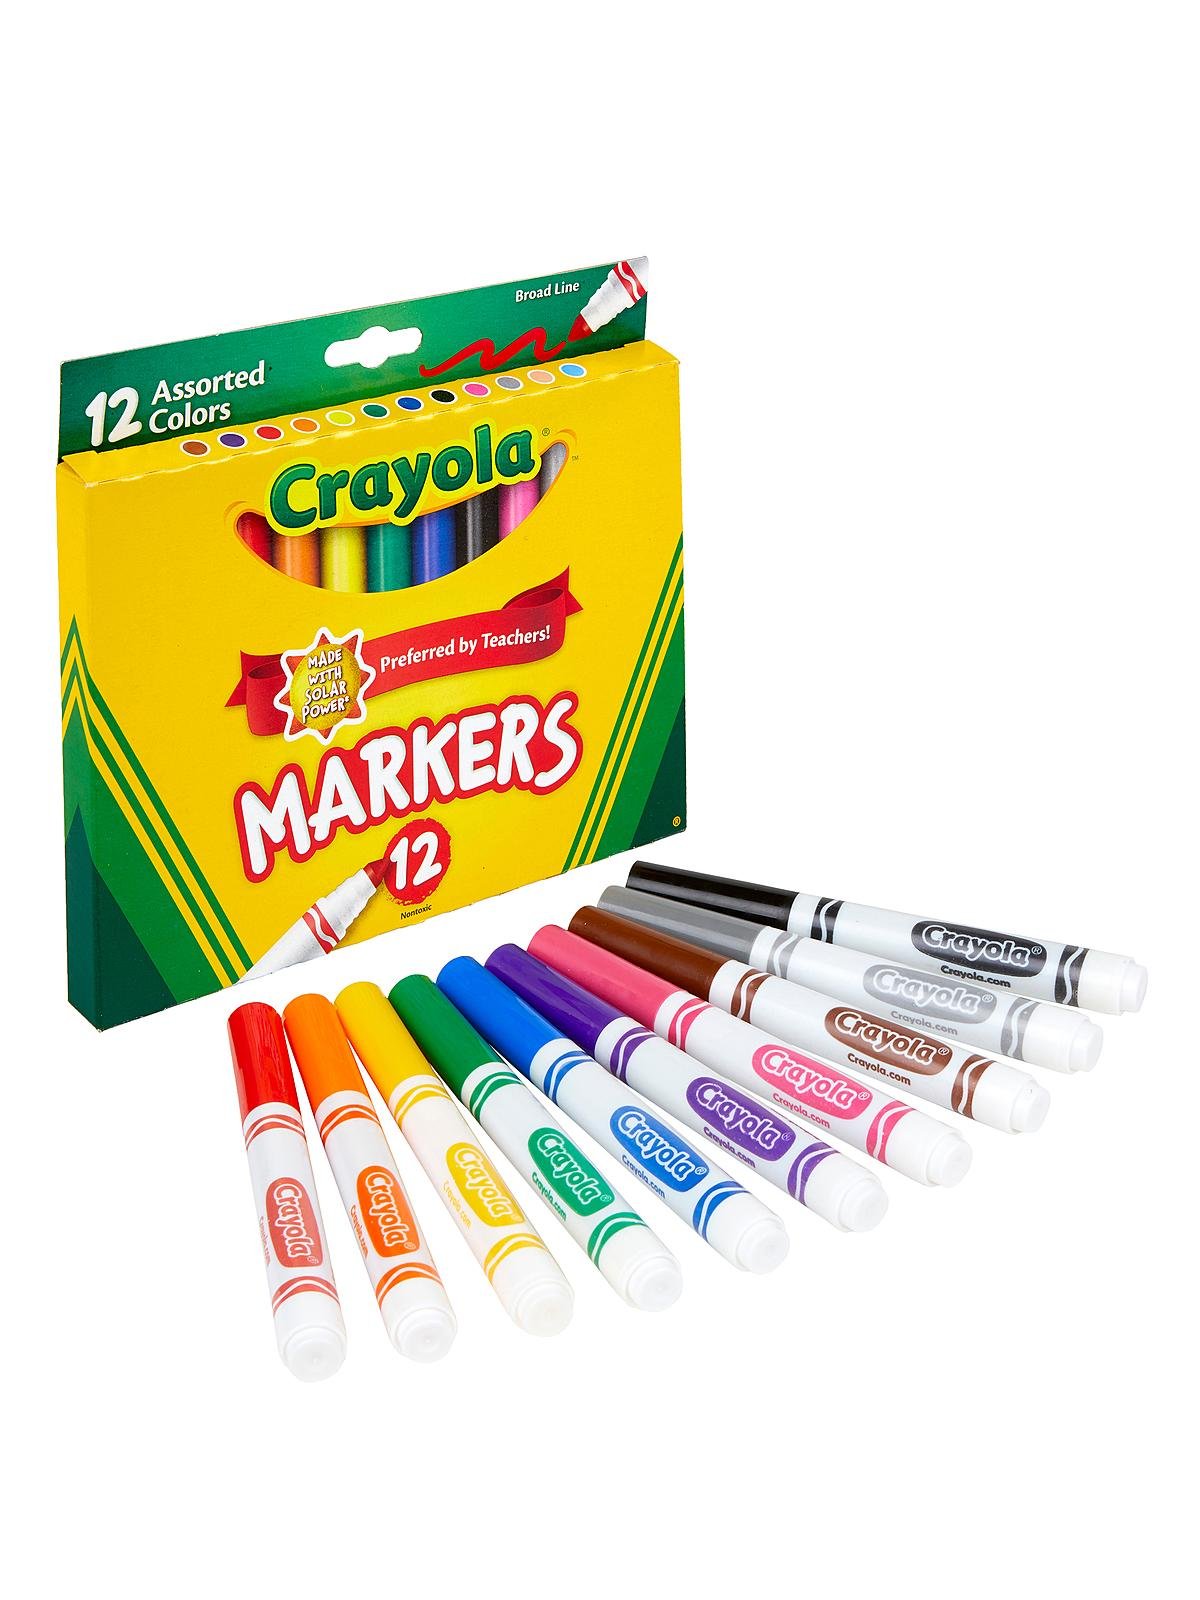 View All Permanent Markers & Marker Pens